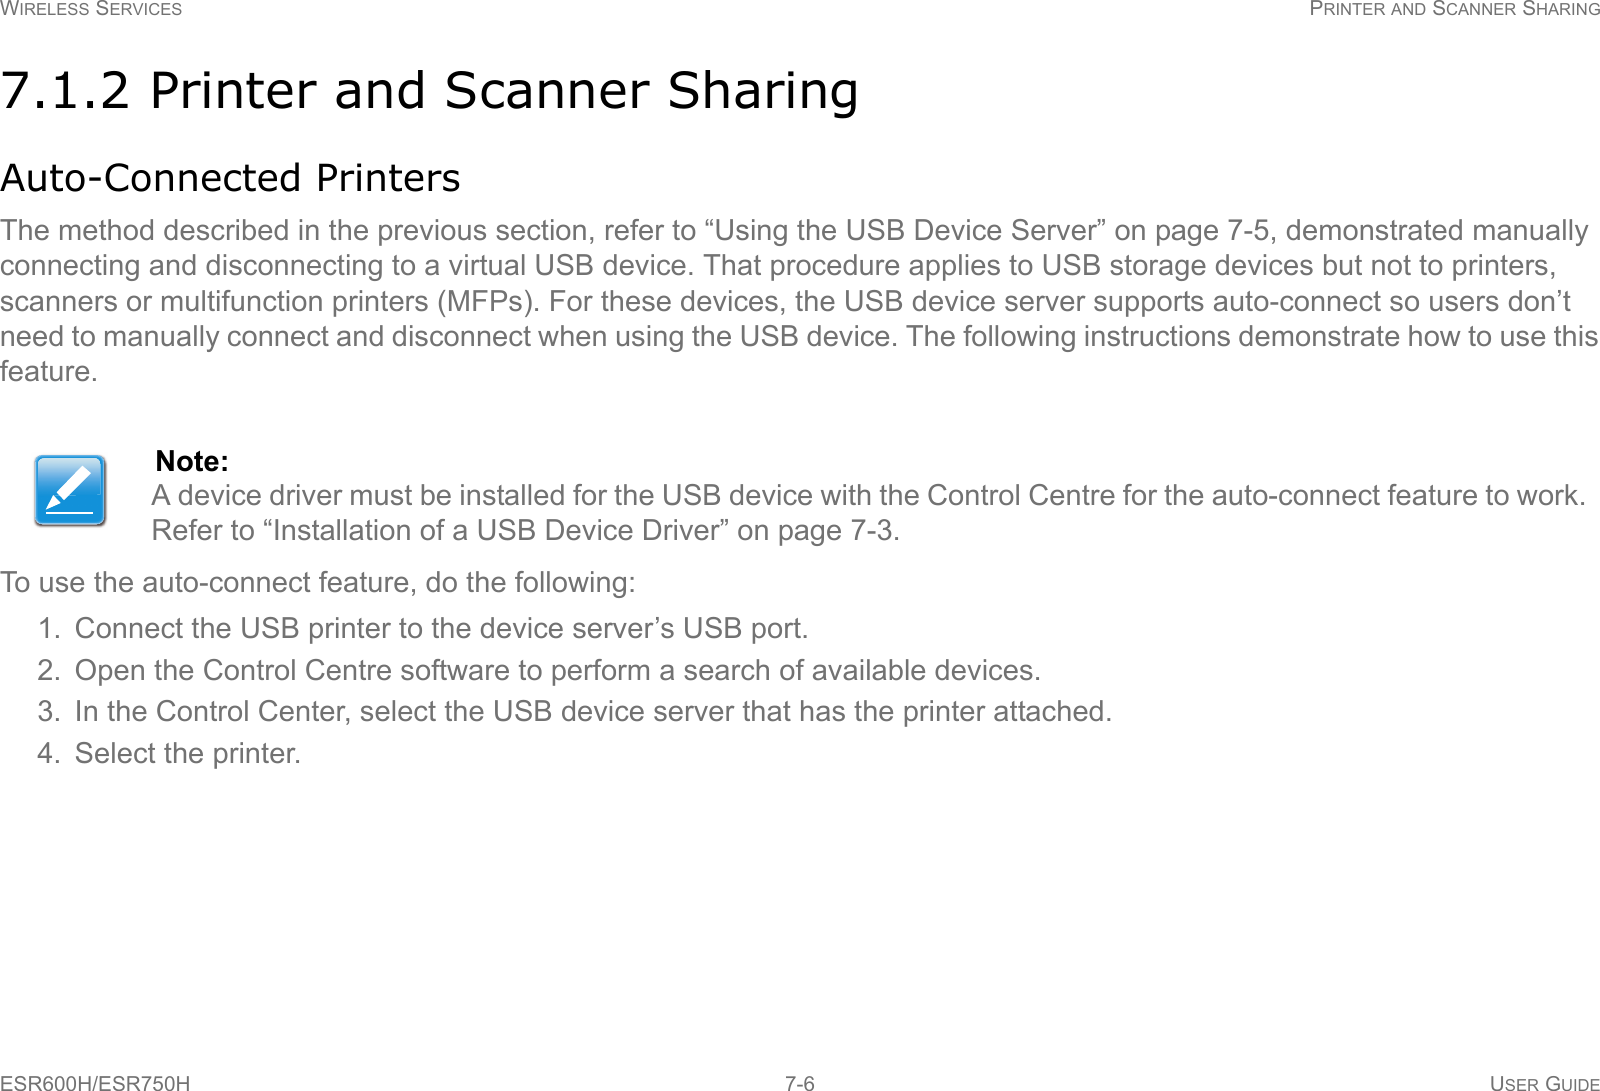 WIRELESS SERVICES PRINTER AND SCANNER SHARINGESR600H/ESR750H 7-6 USER GUIDE7.1.2 Printer and Scanner SharingAuto-Connected PrintersThe method described in the previous section, refer to “Using the USB Device Server” on page 7-5, demonstrated manually connecting and disconnecting to a virtual USB device. That procedure applies to USB storage devices but not to printers, scanners or multifunction printers (MFPs). For these devices, the USB device server supports auto-connect so users don’t need to manually connect and disconnect when using the USB device. The following instructions demonstrate how to use this feature.To use the auto-connect feature, do the following:1. Connect the USB printer to the device server’s USB port.2. Open the Control Centre software to perform a search of available devices.3. In the Control Center, select the USB device server that has the printer attached.4. Select the printer.Note:A device driver must be installed for the USB device with the Control Centre for the auto-connect feature to work. Refer to “Installation of a USB Device Driver” on page 7-3.